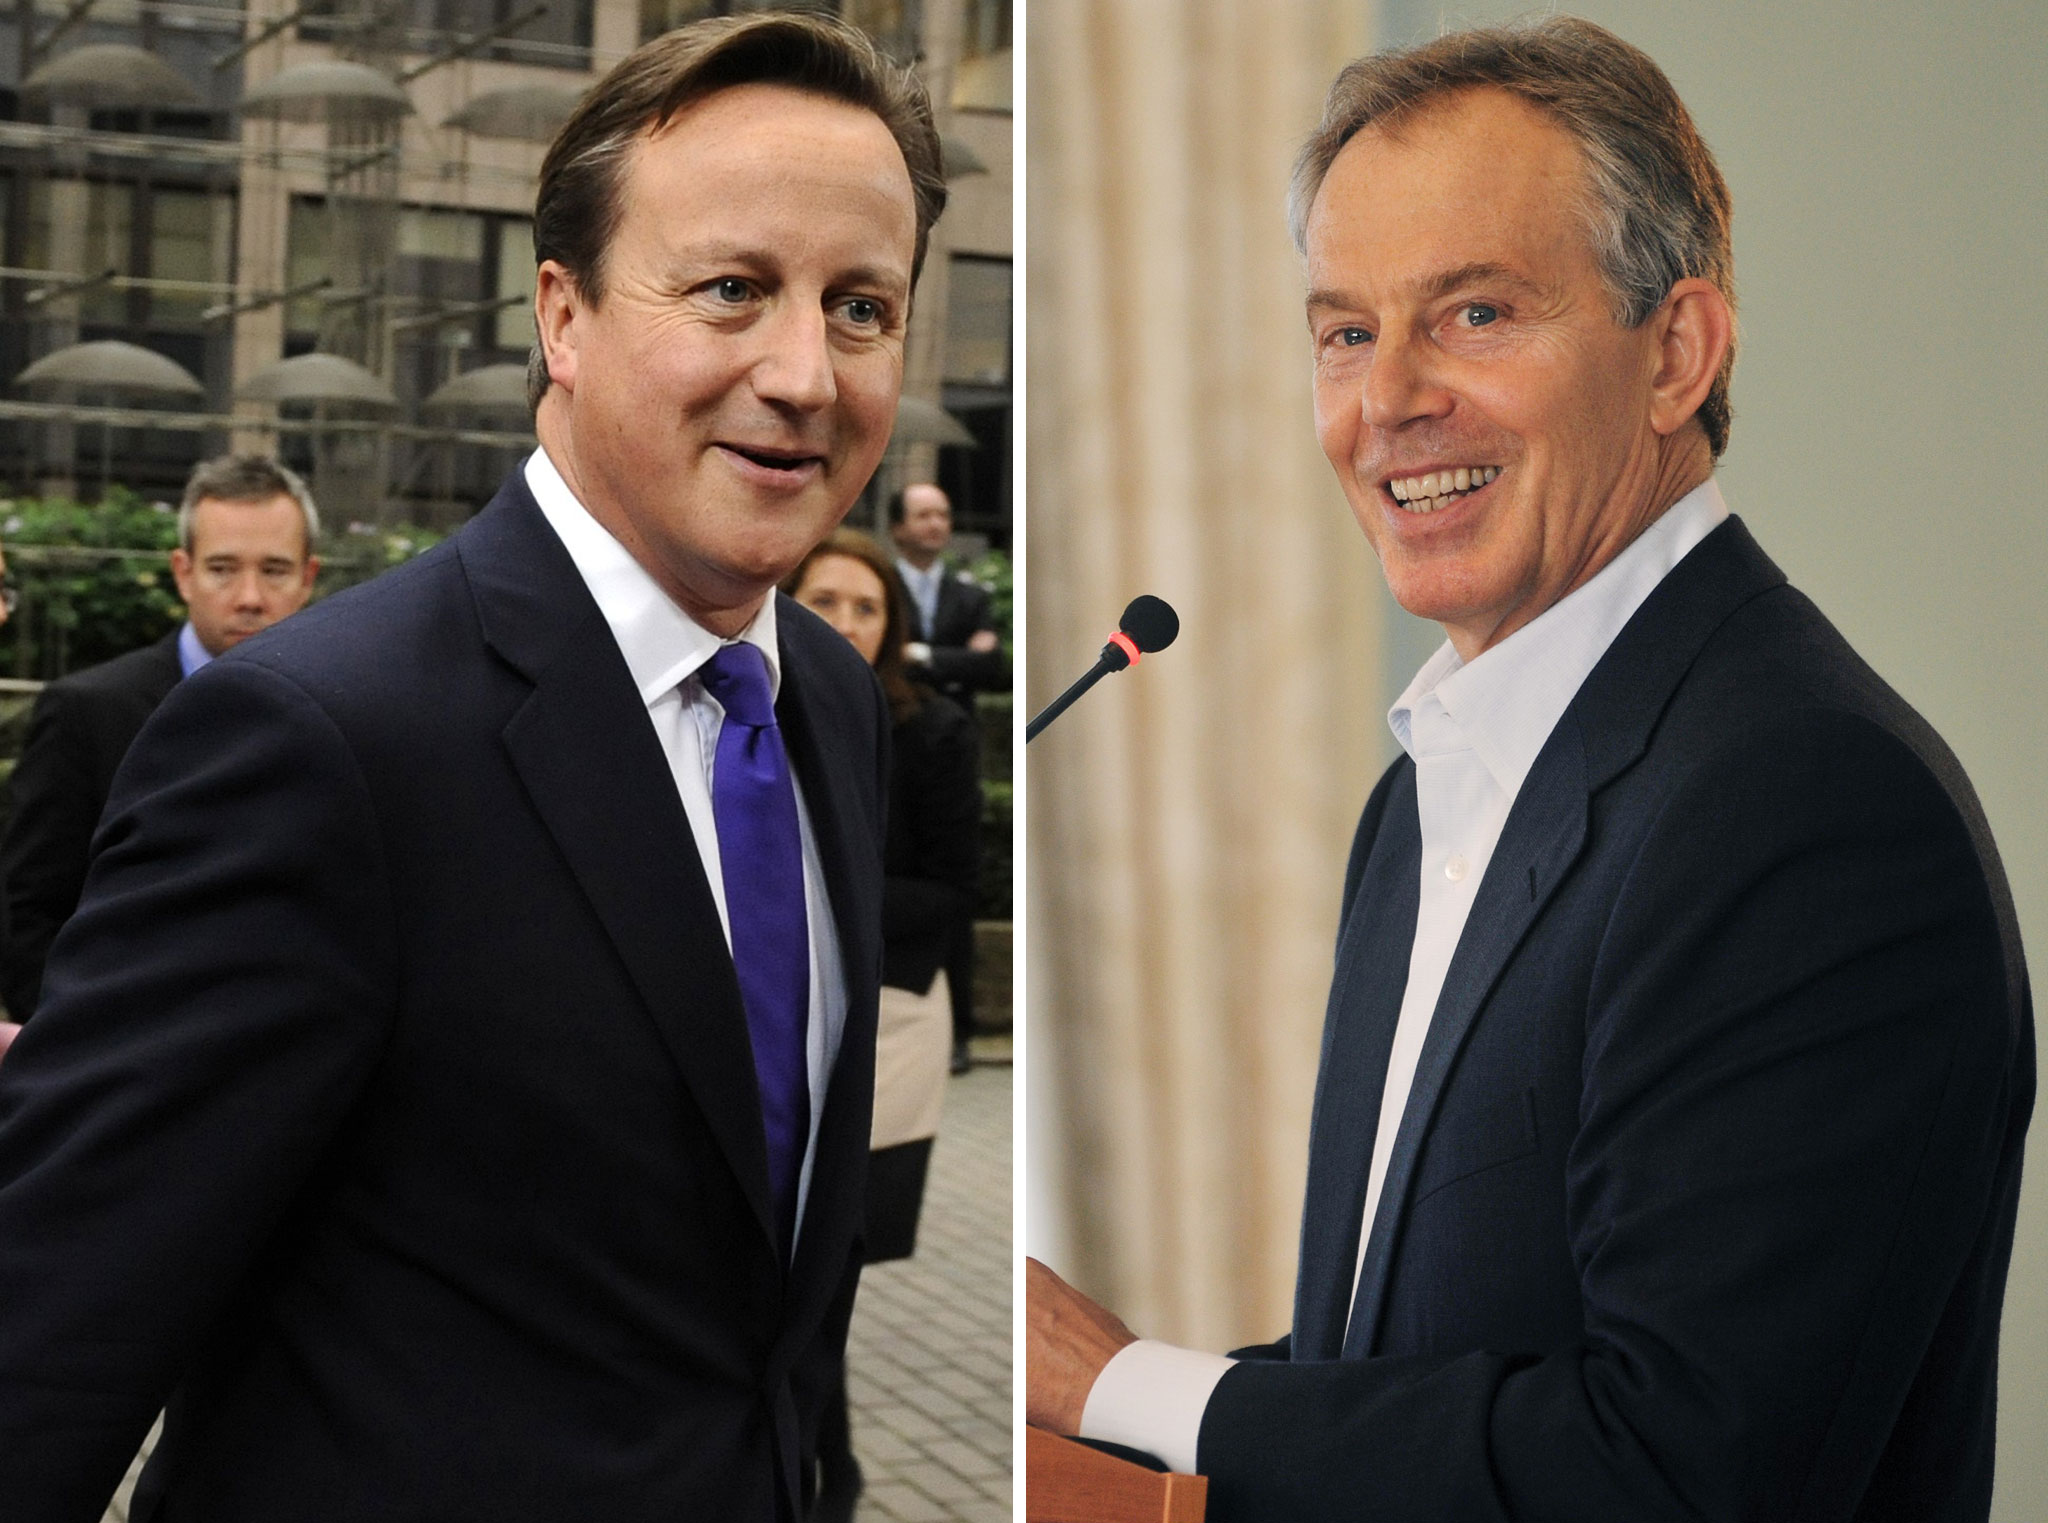 The friendship between former PM Tony Blair and current PM David Cameron is an unlikely one